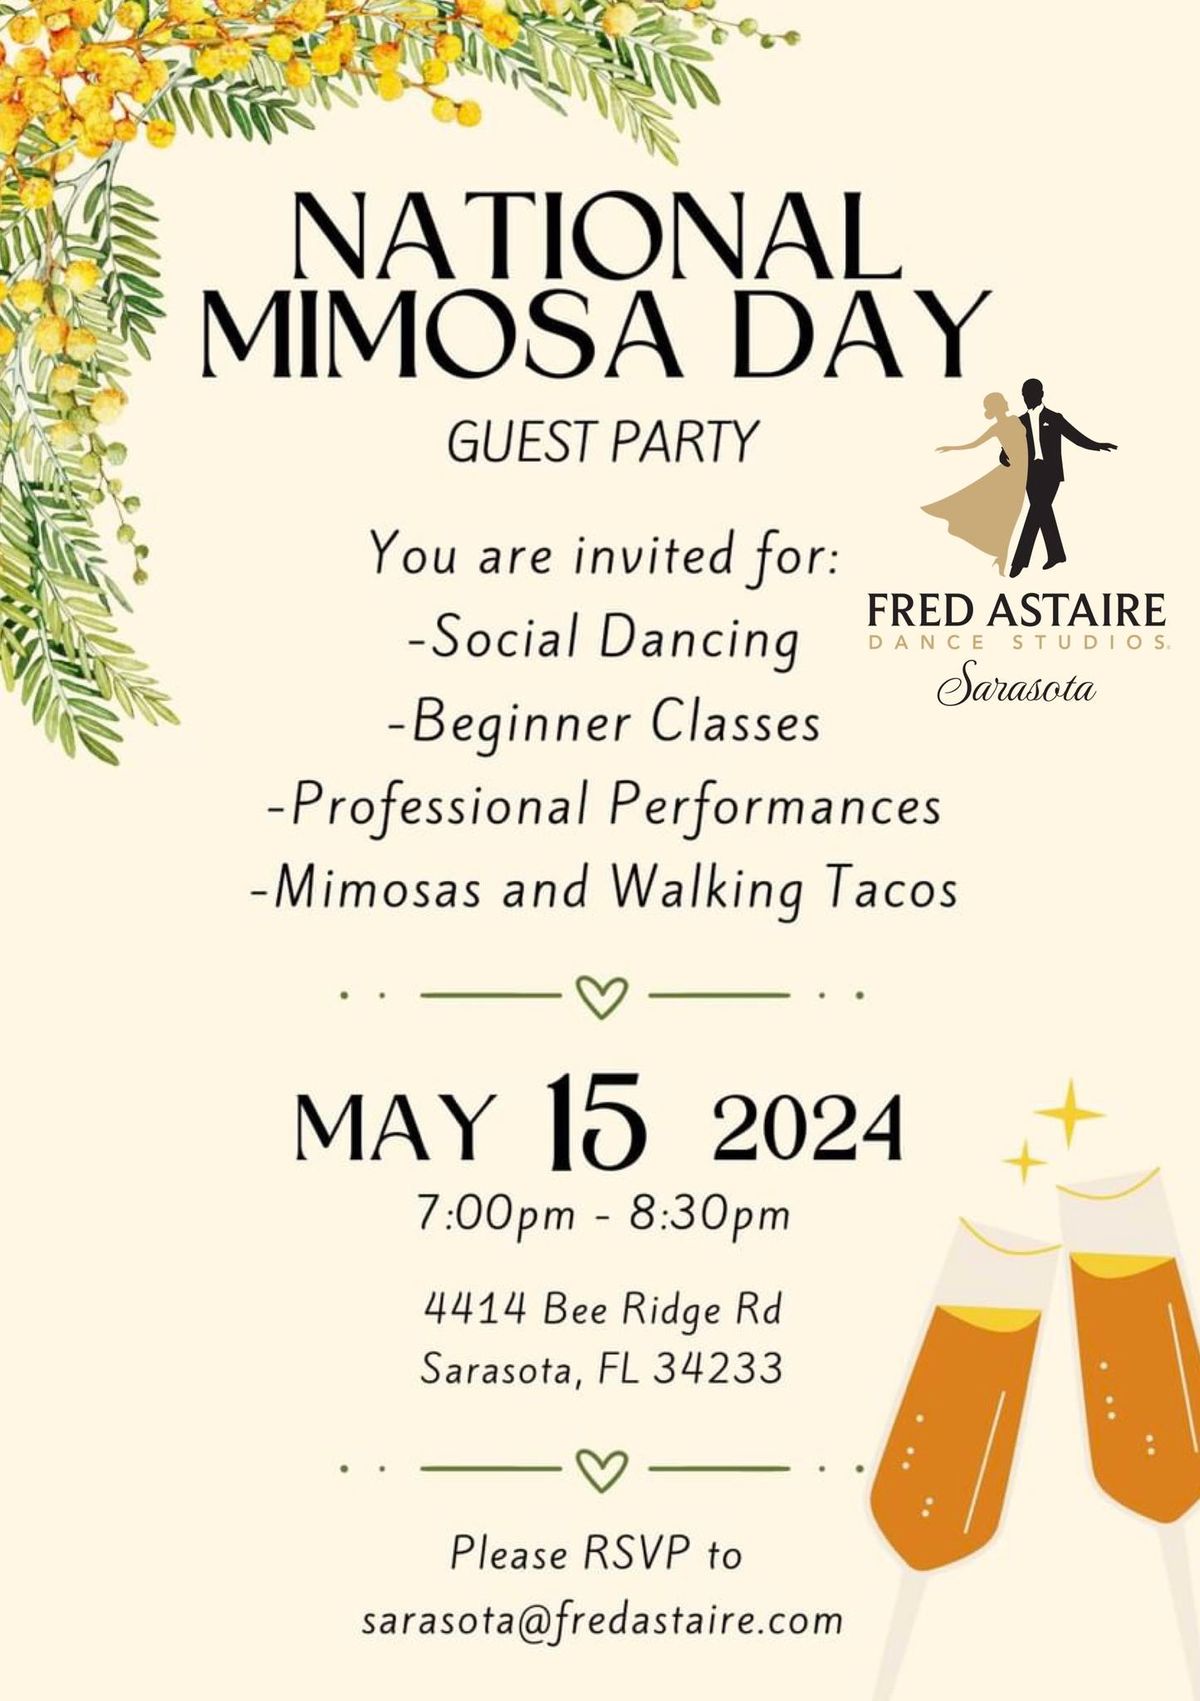 Mimosa Day Guest Party!